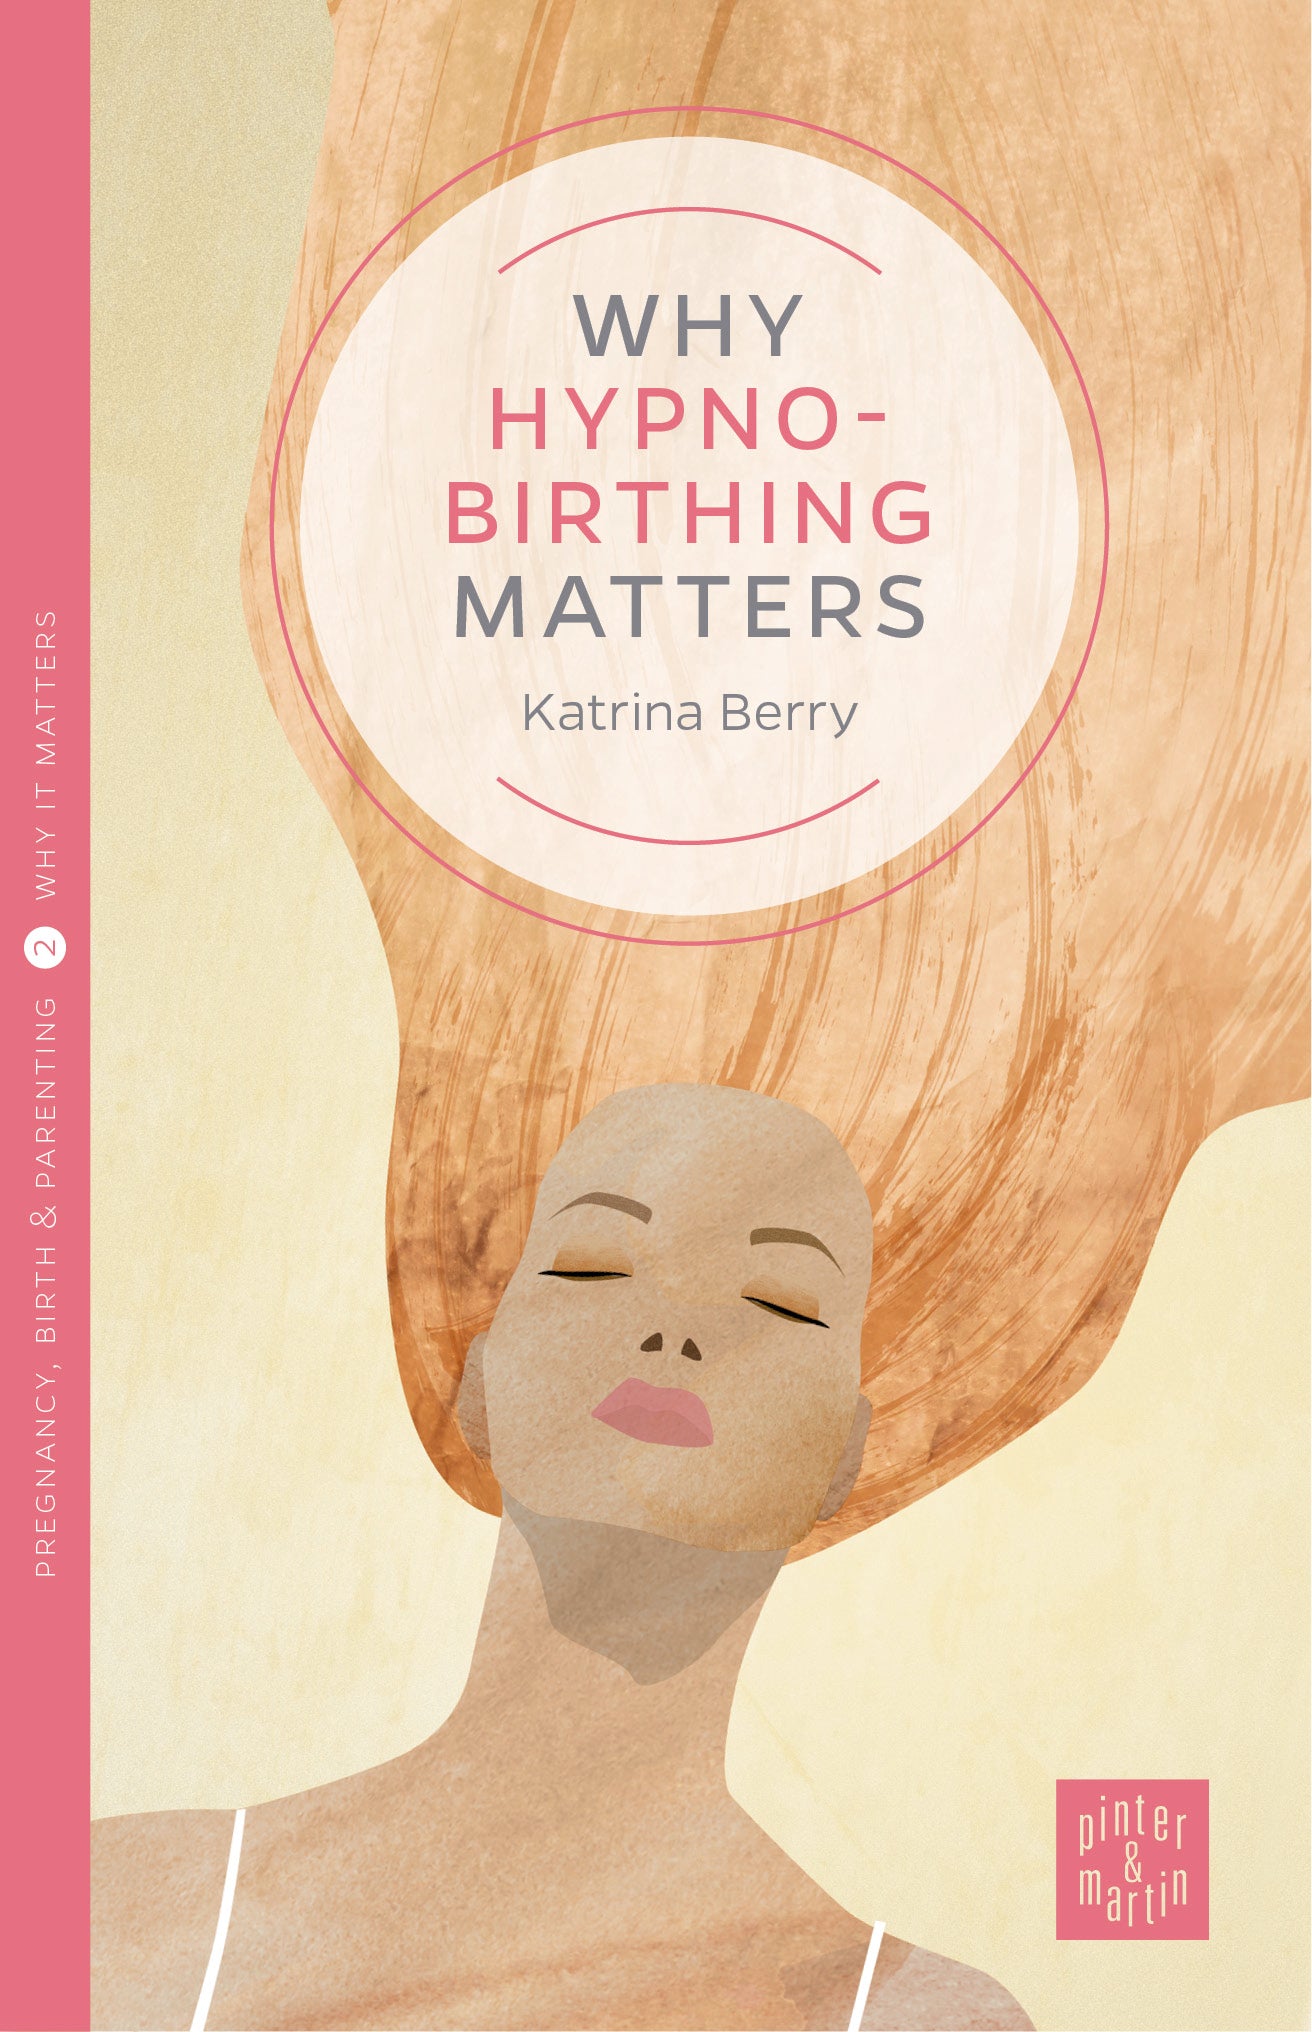 Why Hypnobirthing Matters (revised and updated)